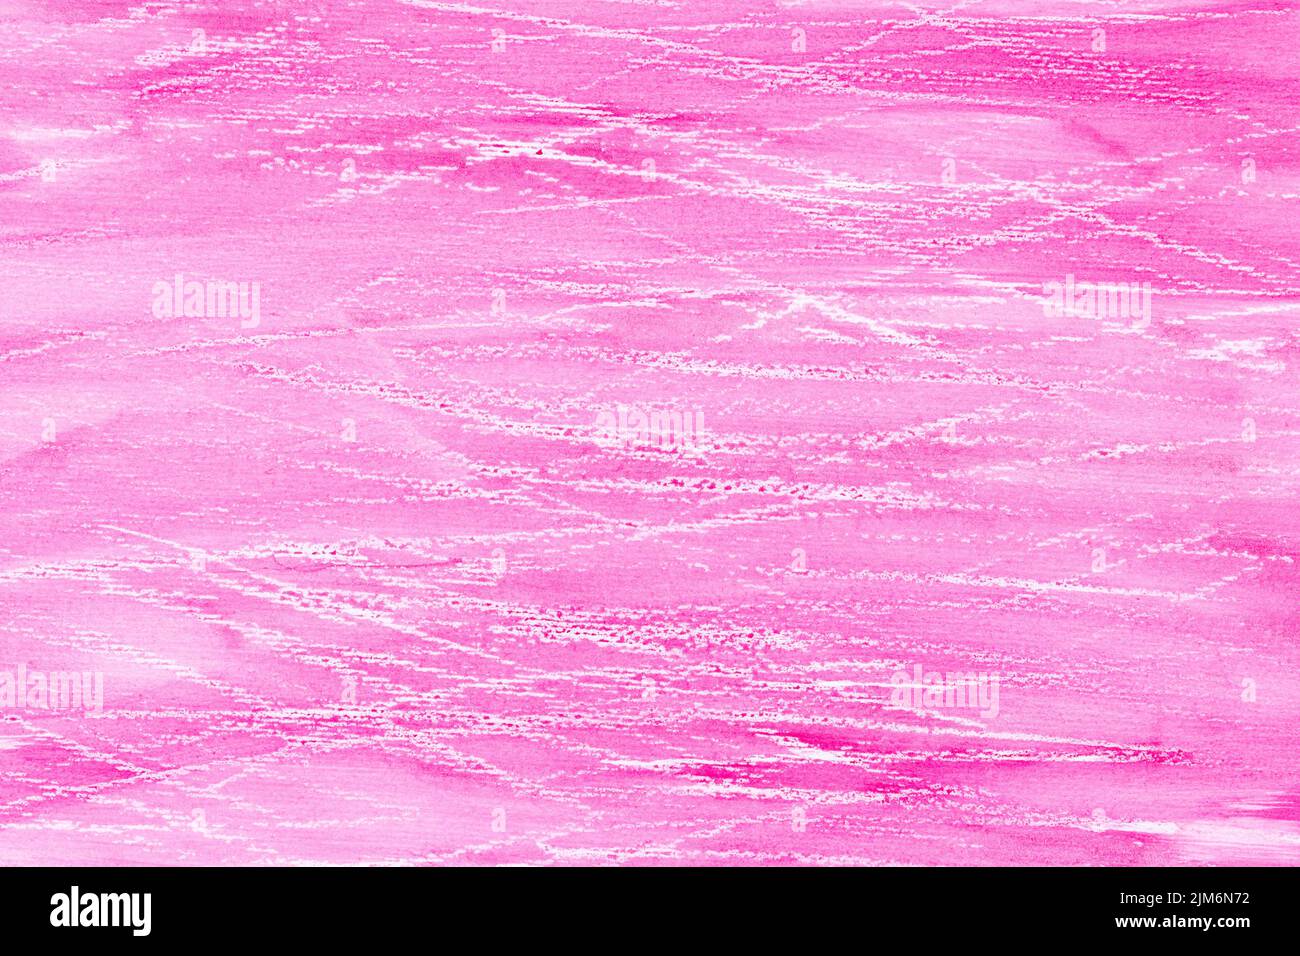 pink painted watercolor on paper background texture Stock Photo